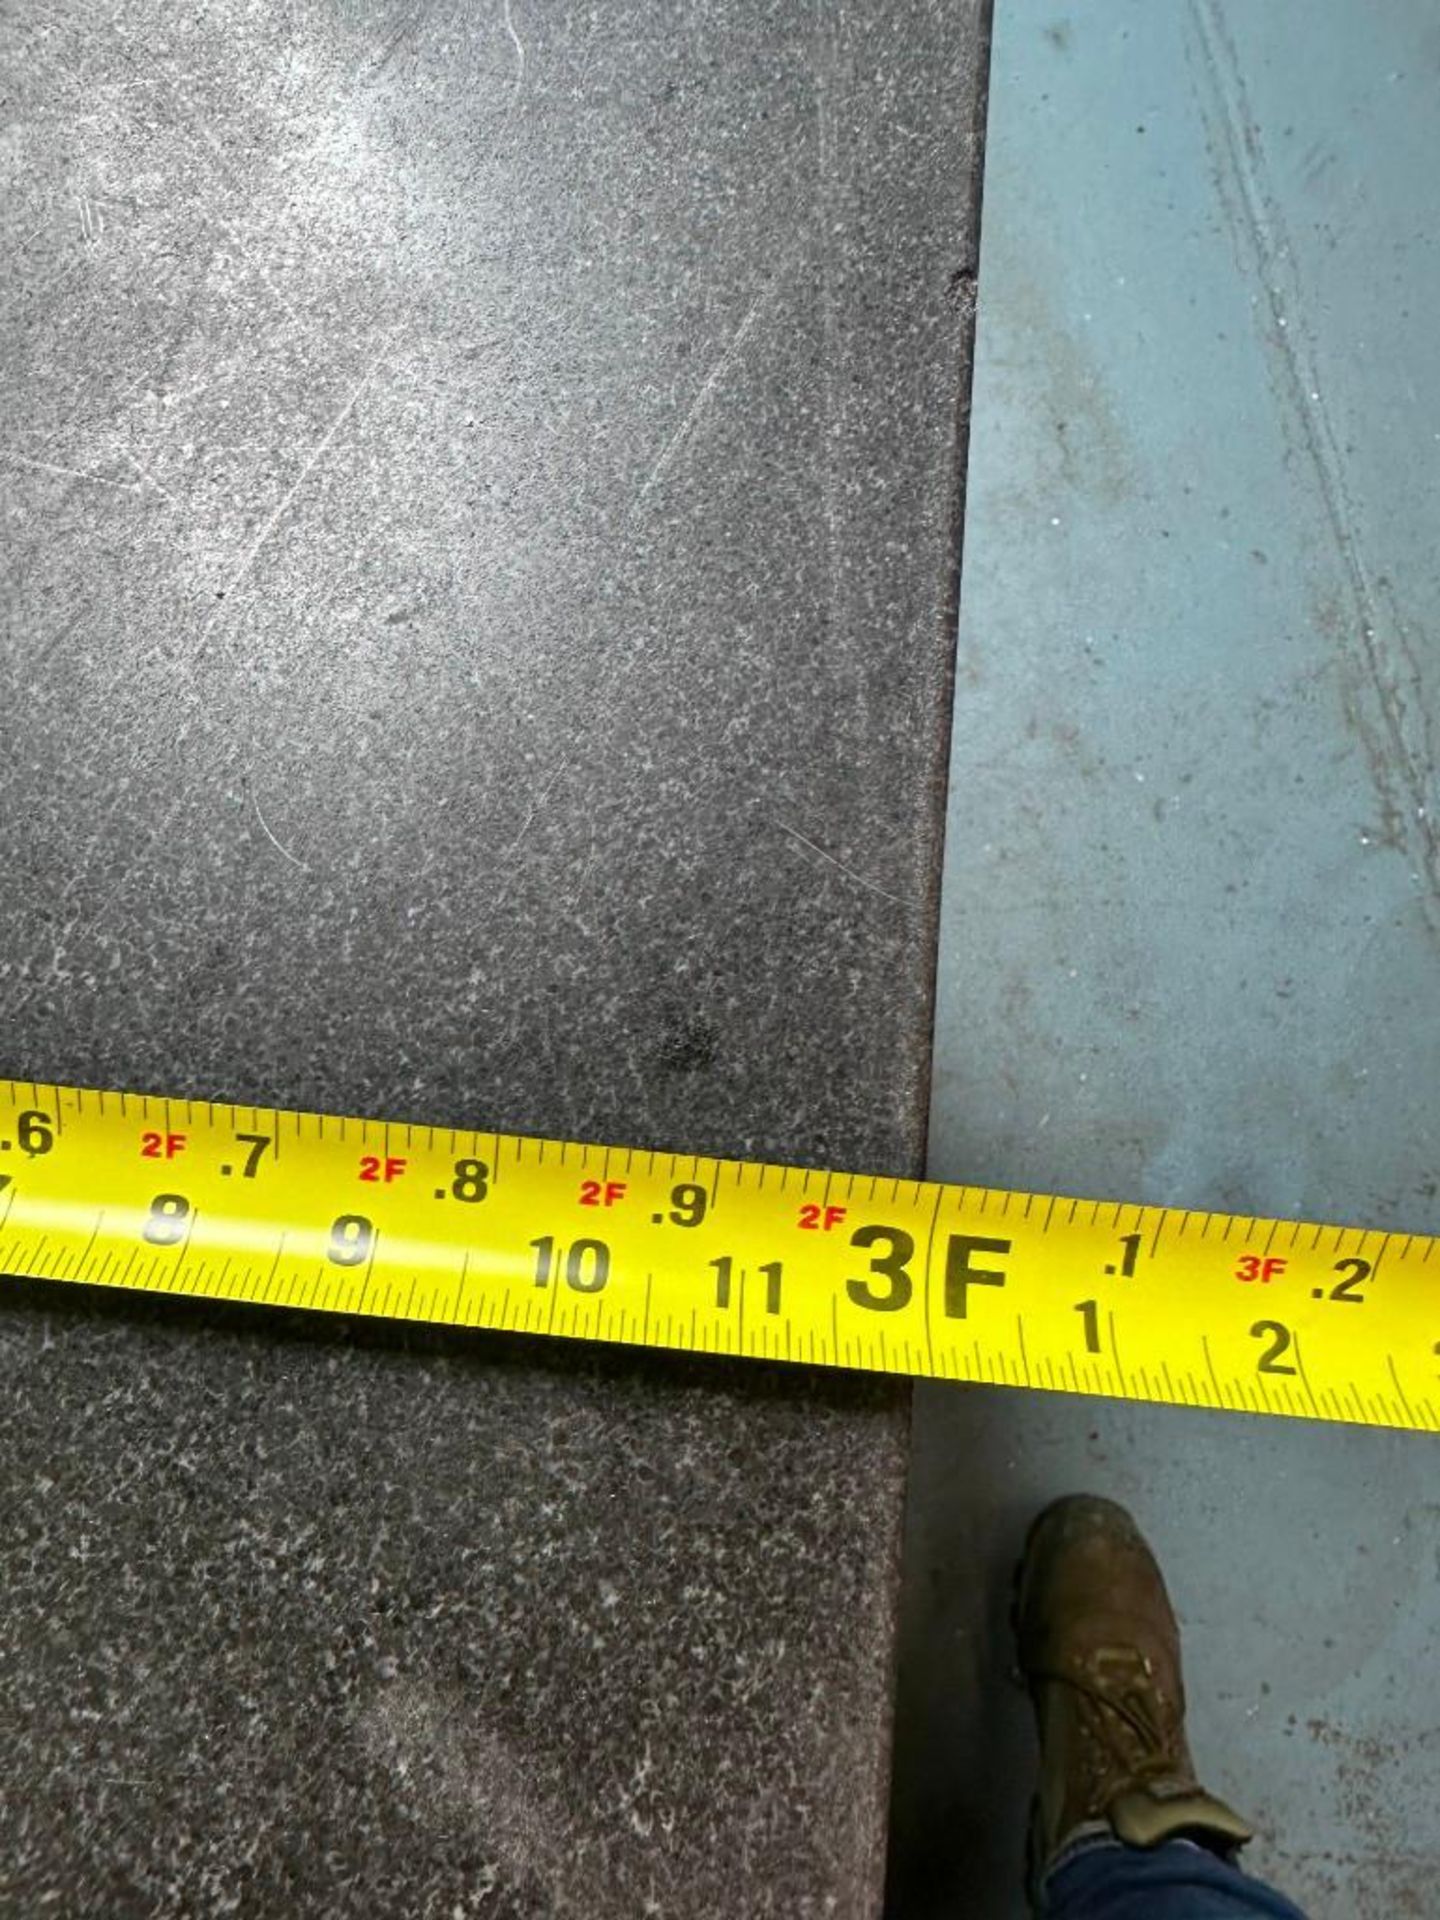 JGI GRANITE SURFACE INSPECTION PLATE WITH STAND 36" X 48" - Image 5 of 6